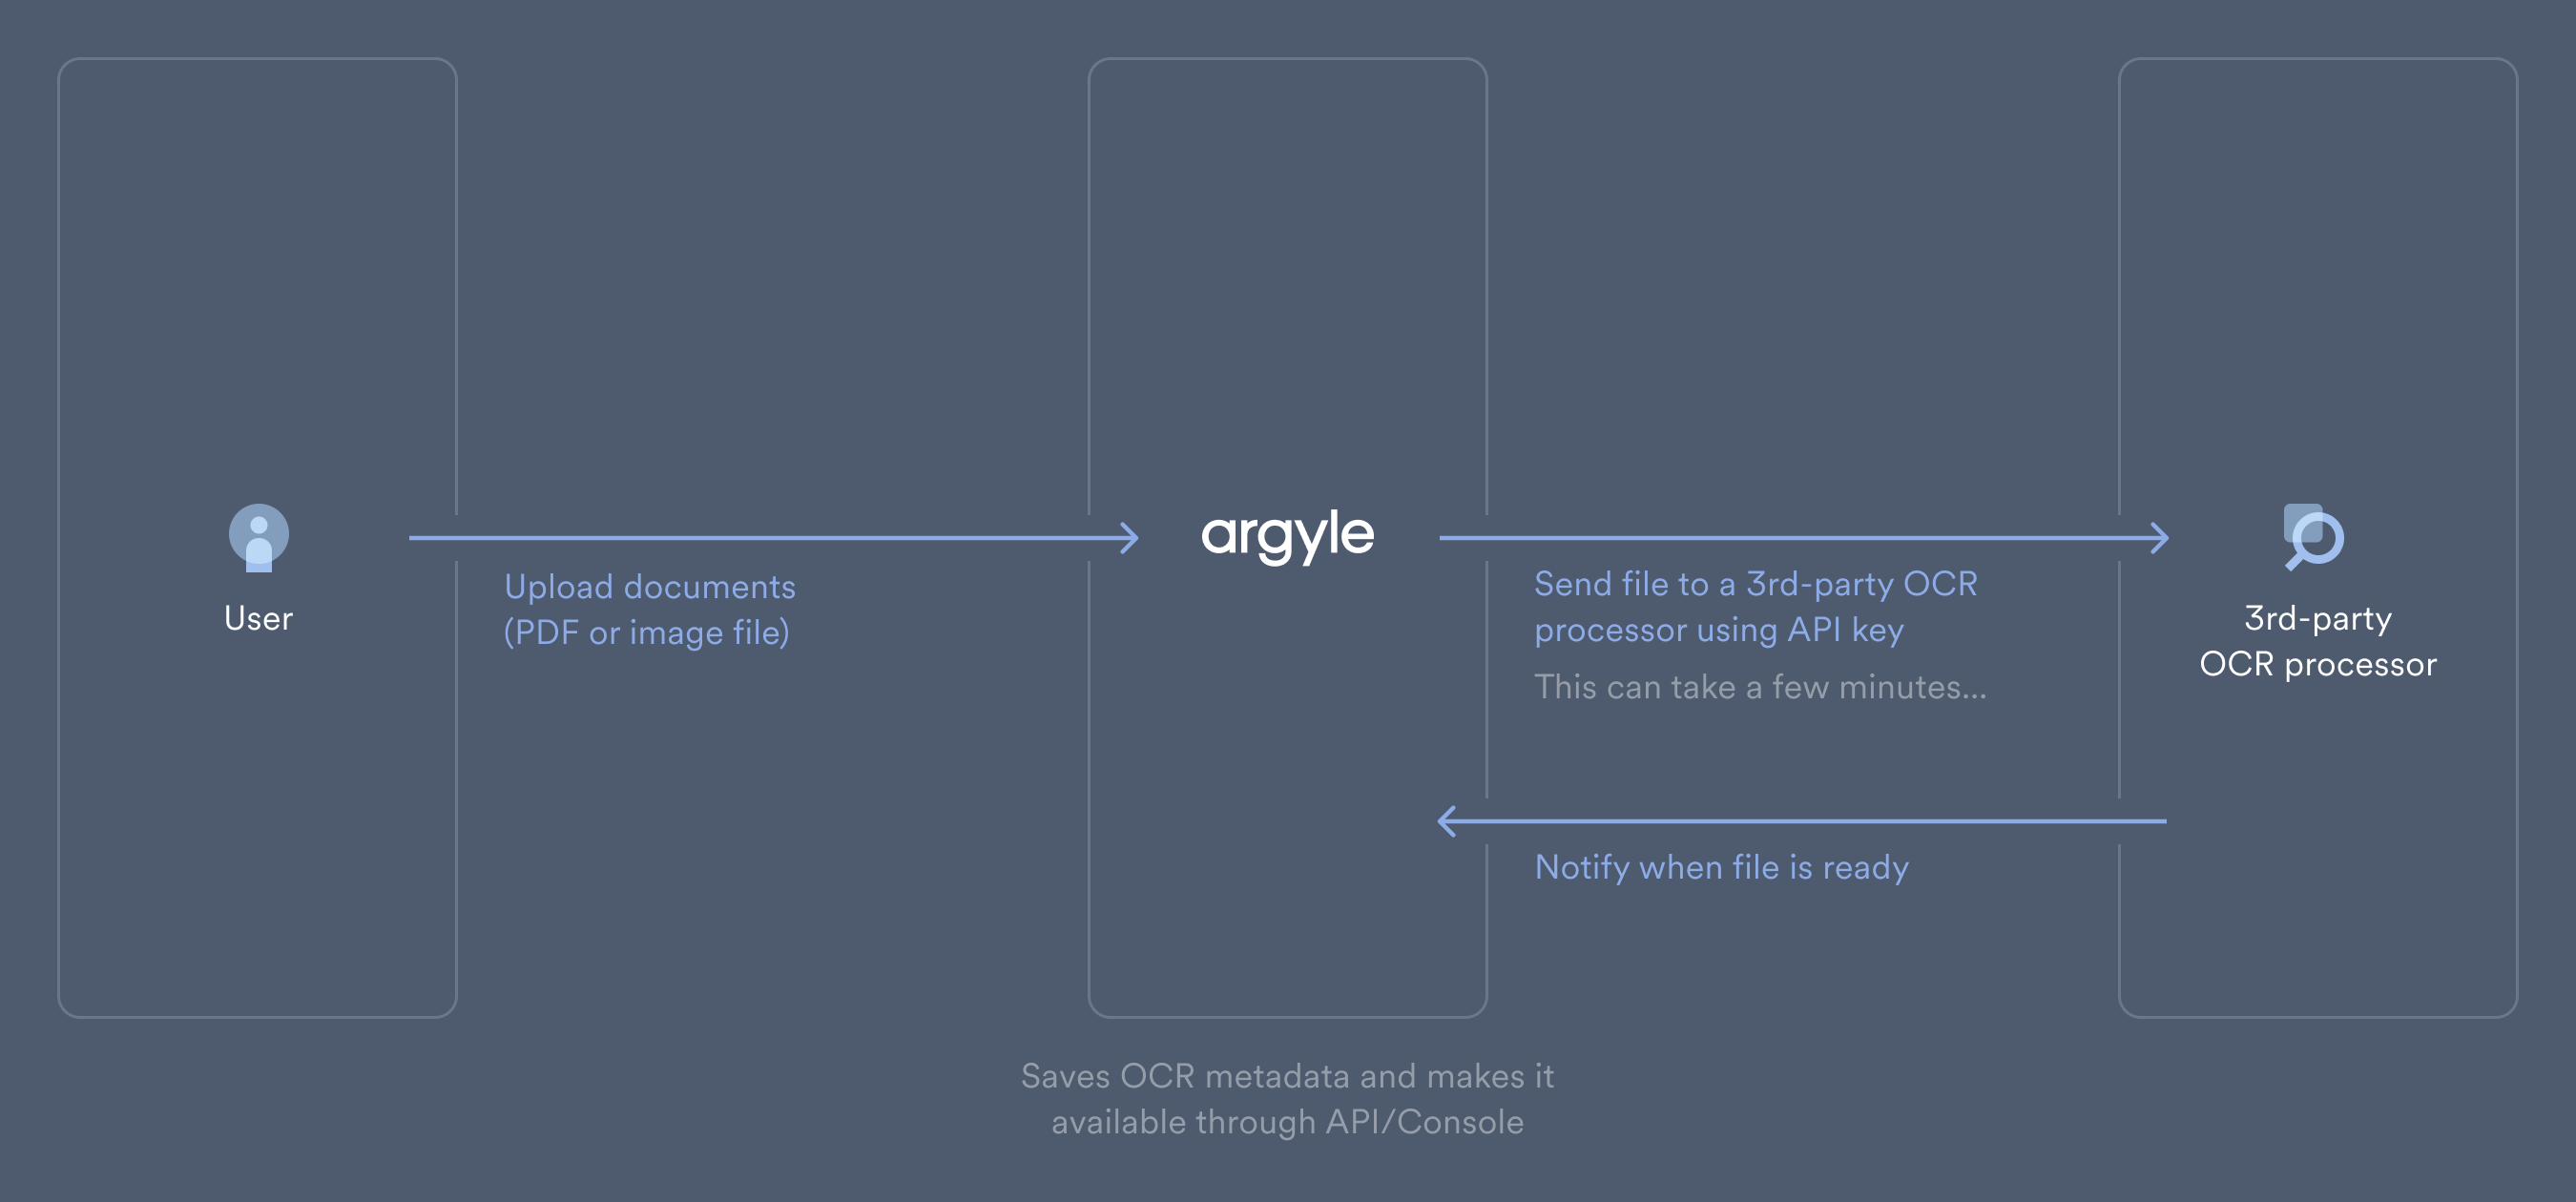 Image showing the process of integrating third party OCR data with Argyle.